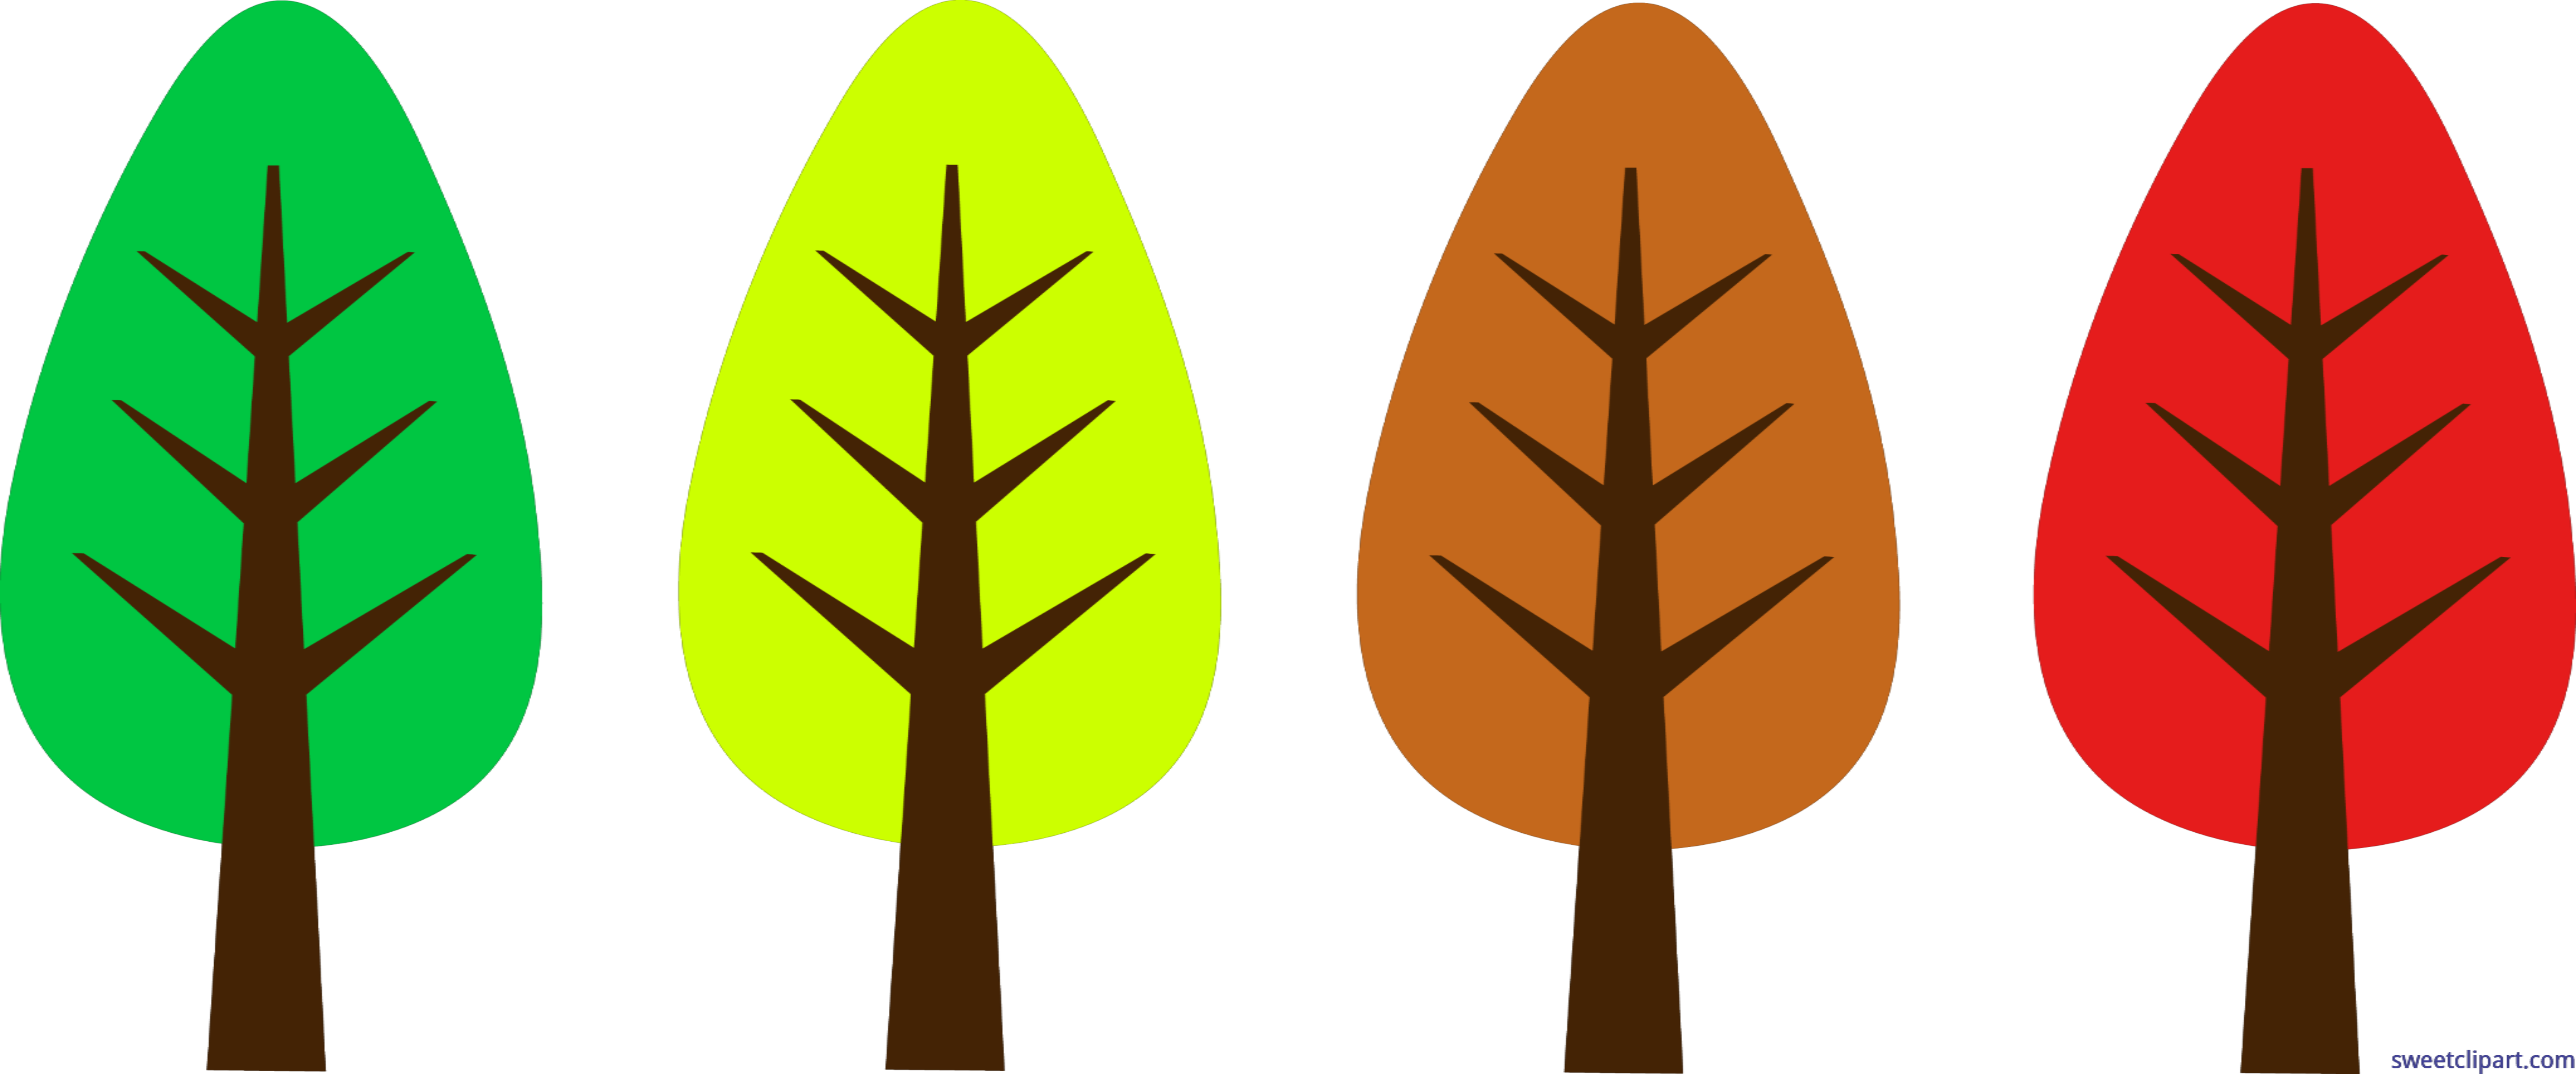 nature clipart simple